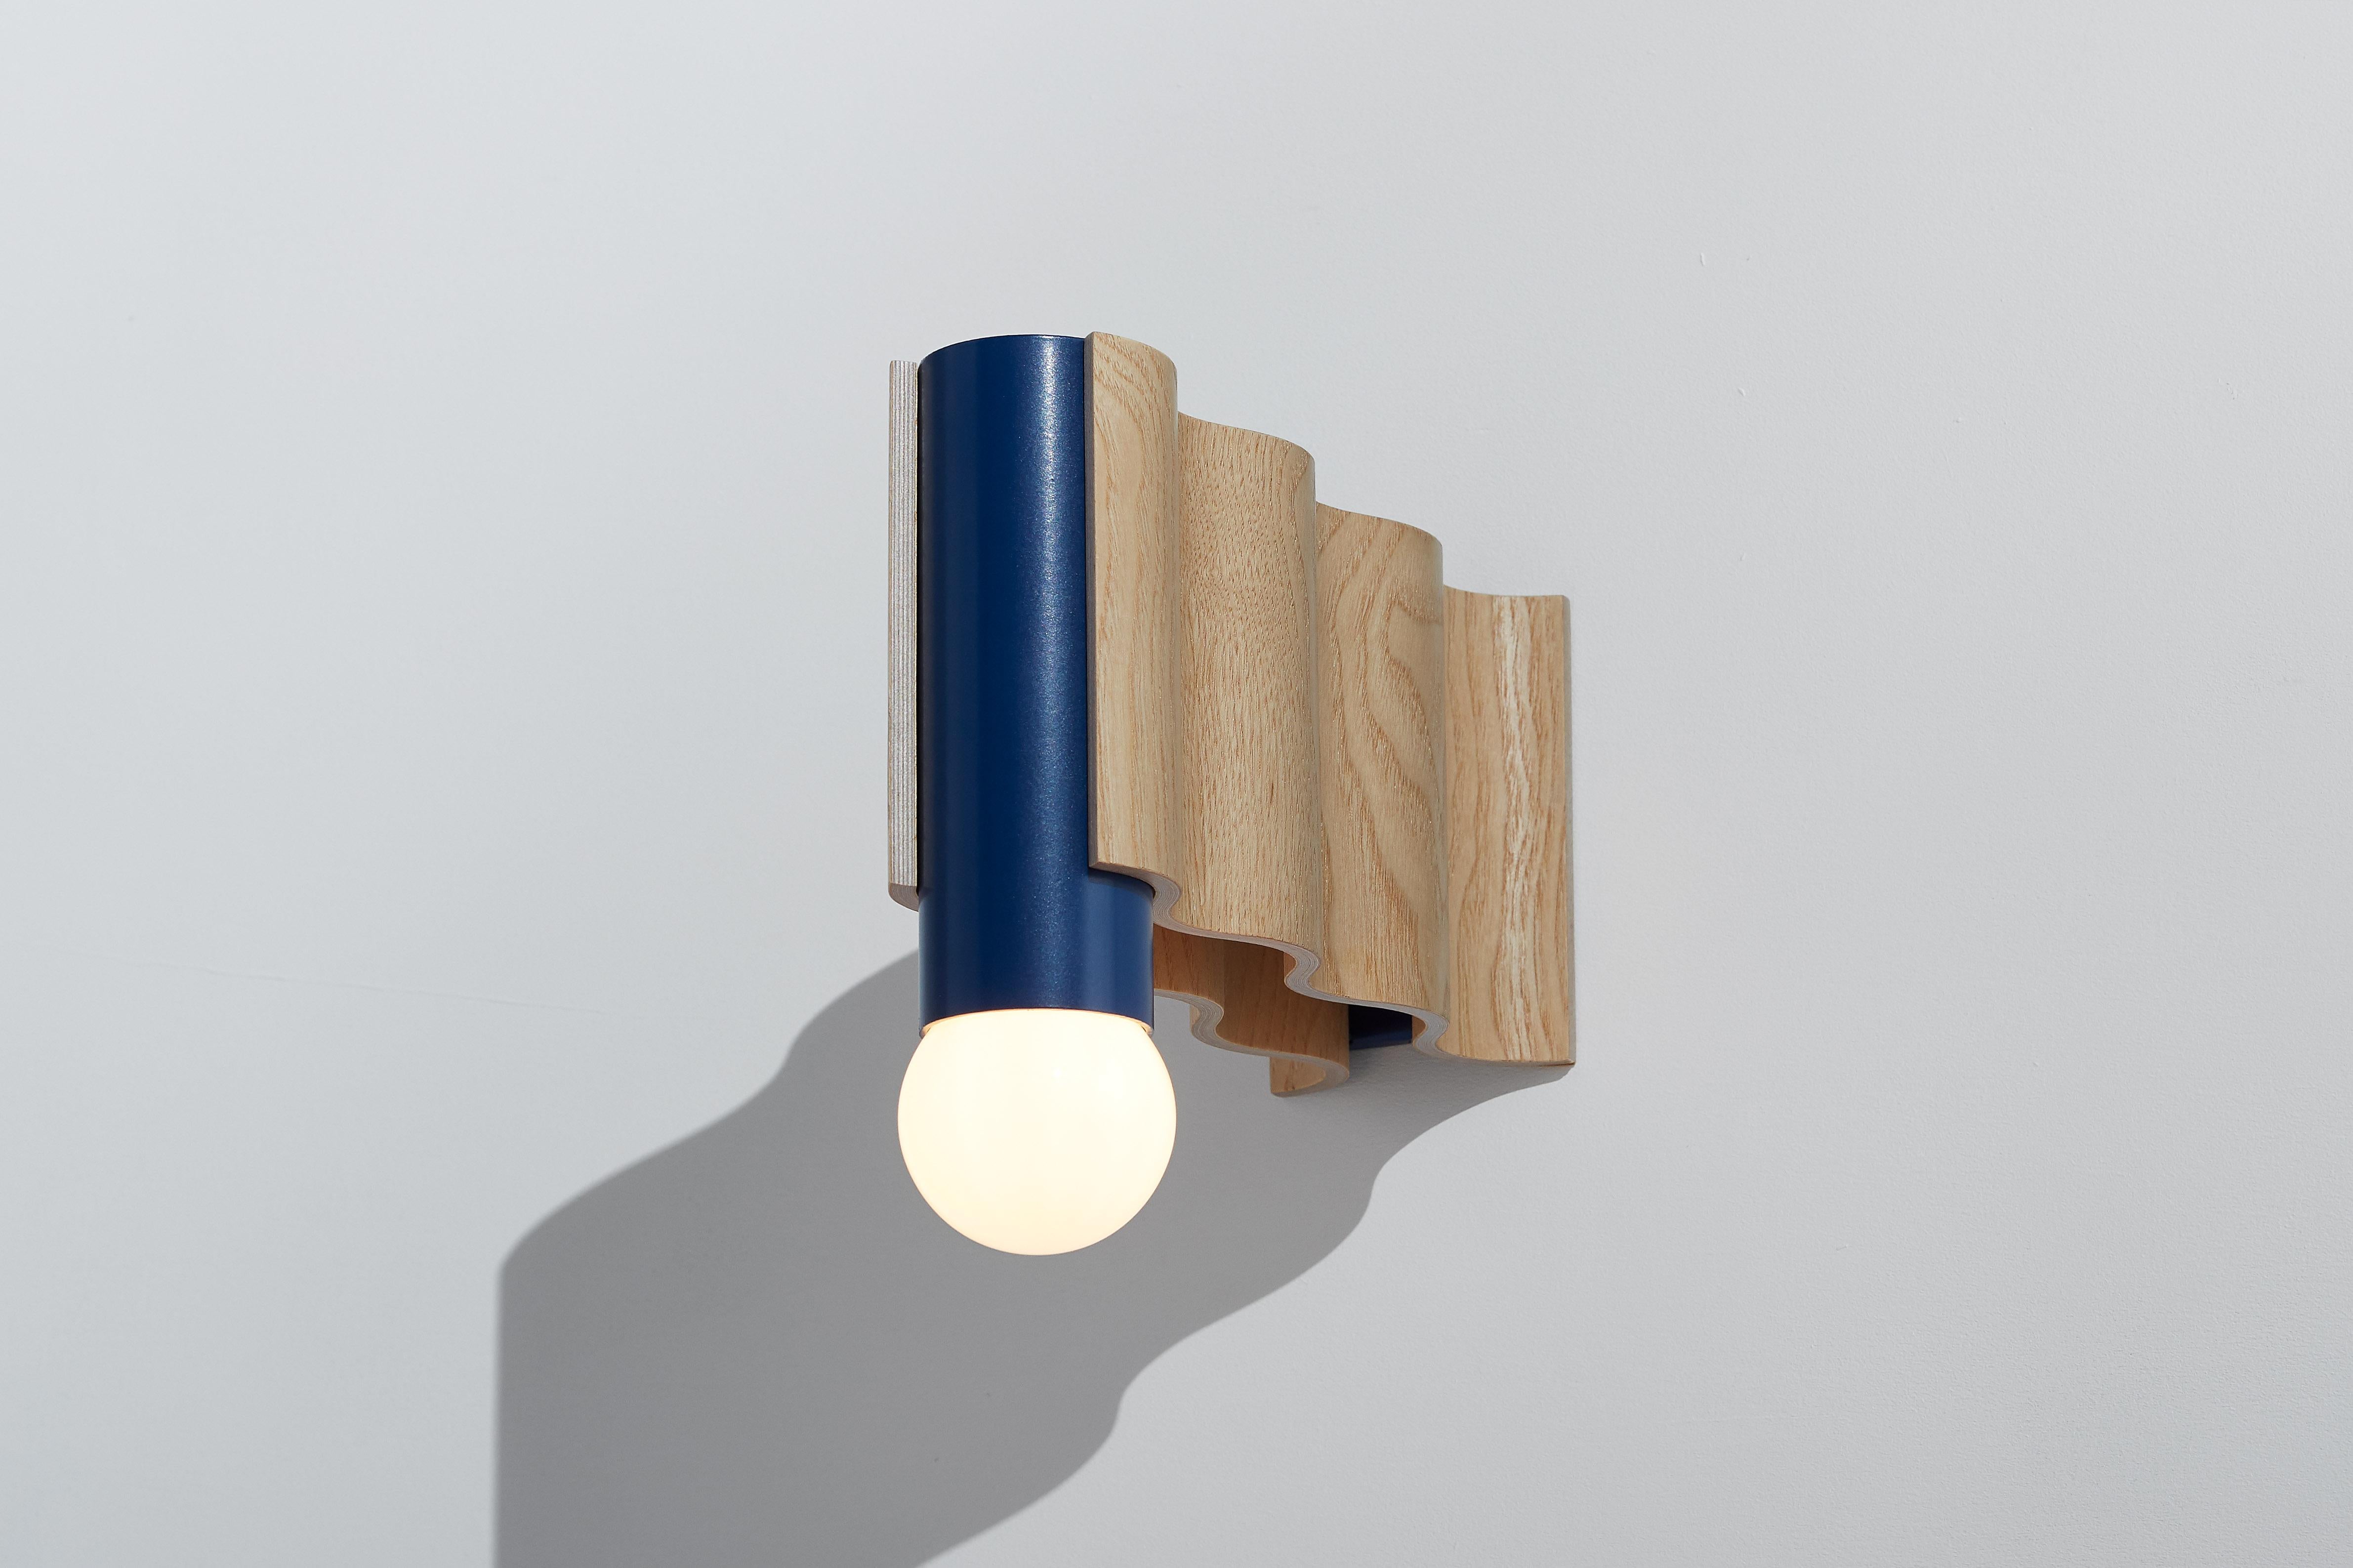 Aluminum Double Corrugation Sconce / Wall Light in Natural Ash Veneer and Sapphire Blue For Sale